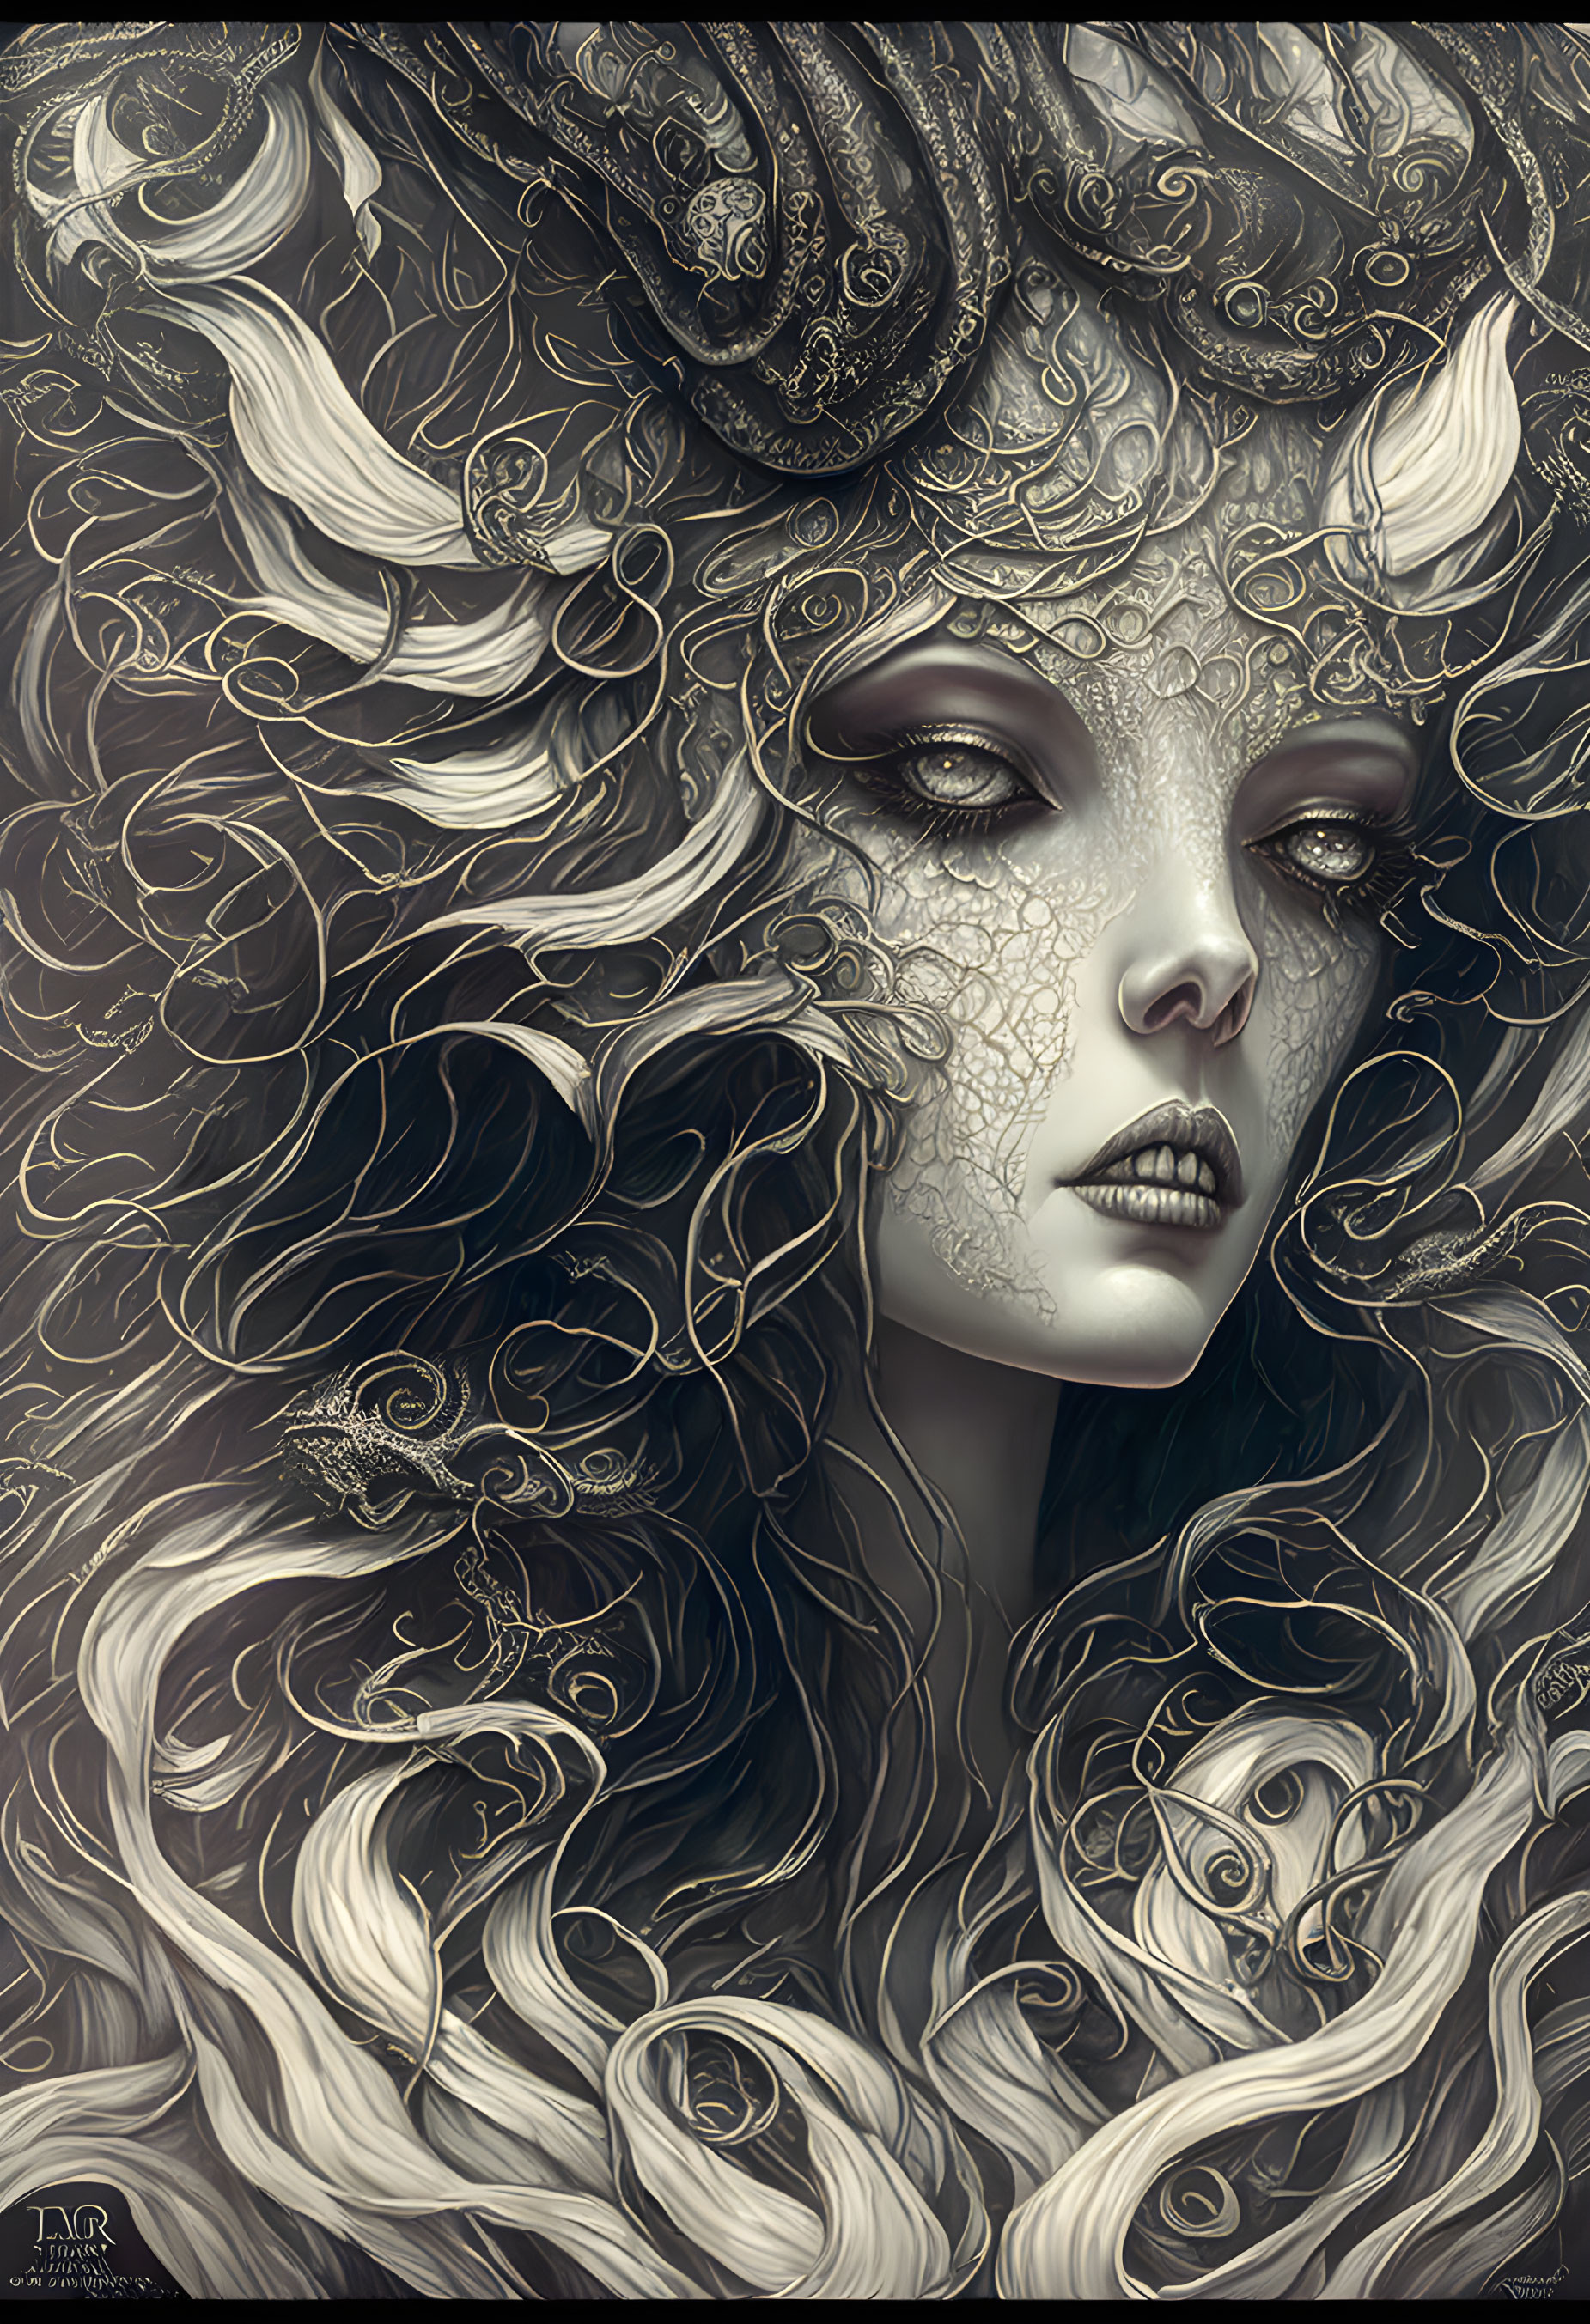 Gothic surreal artwork featuring pale female figure with intricate gold patterns